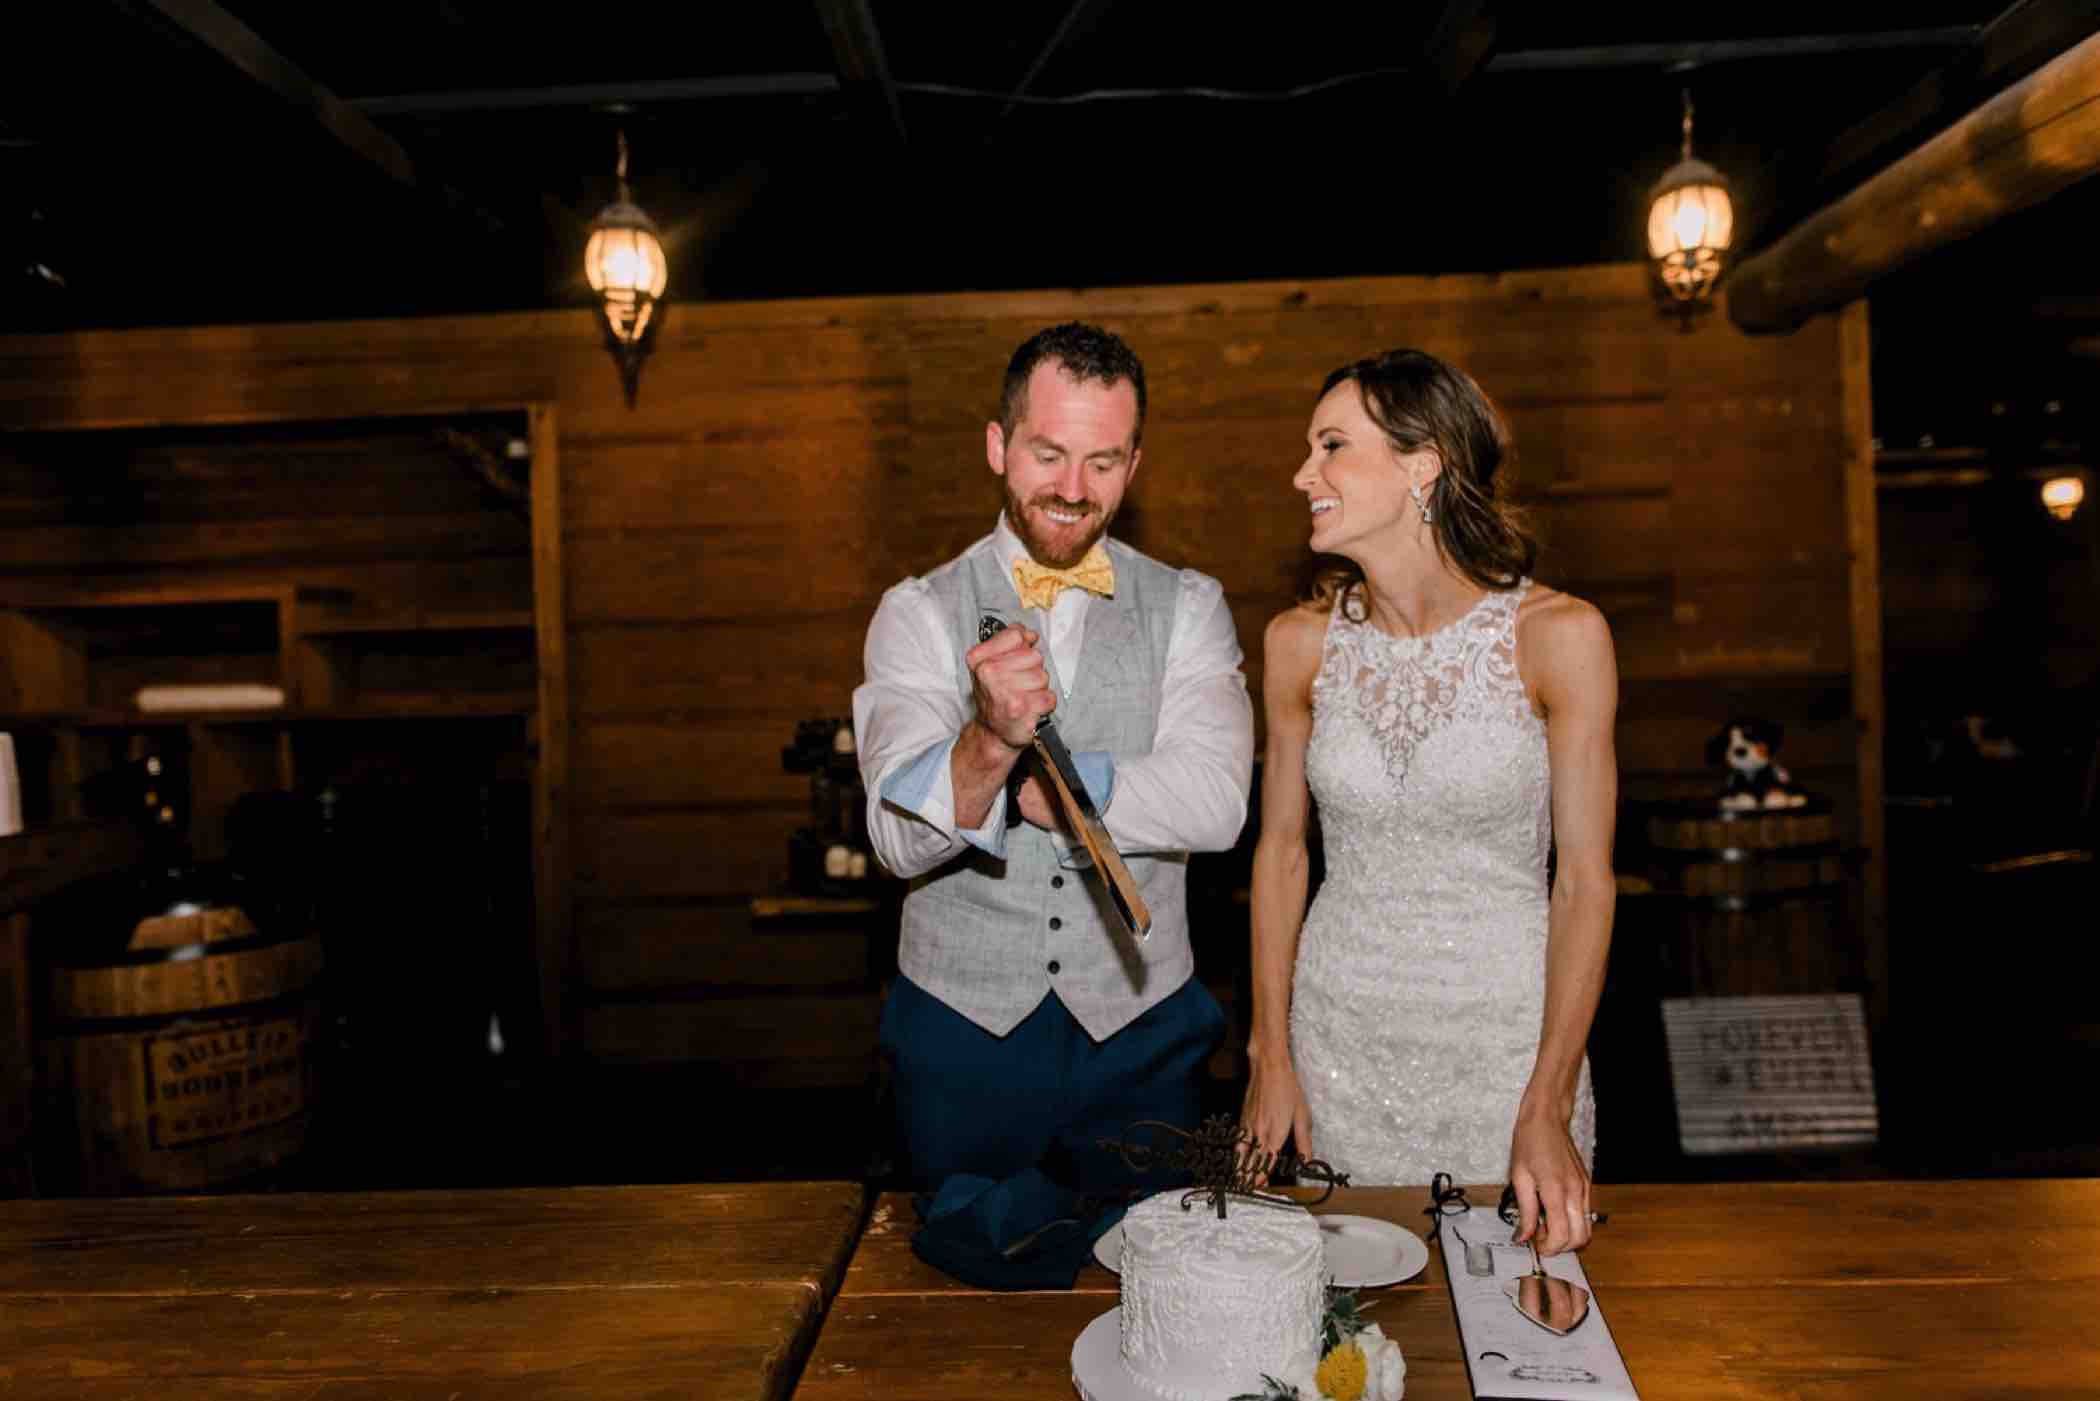 Kris and Sallie get ready to cut the cake at their wedding reception at Piney River Ranch in Vail, Colorado. Photo by Ali and Garrett, Romantic, Adventurous, Nostalgic Wedding Photographers.